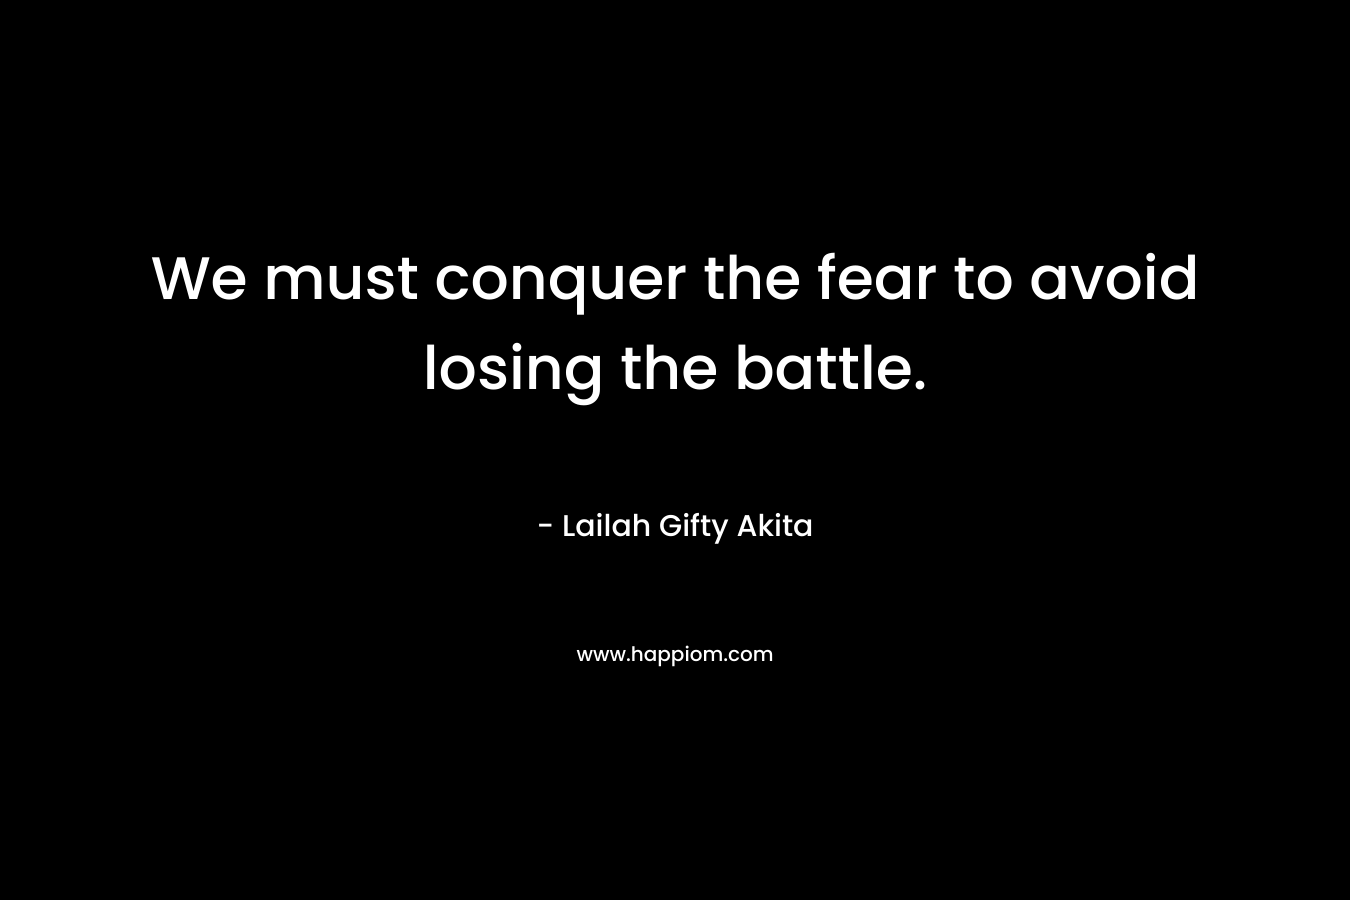 We must conquer the fear to avoid losing the battle.